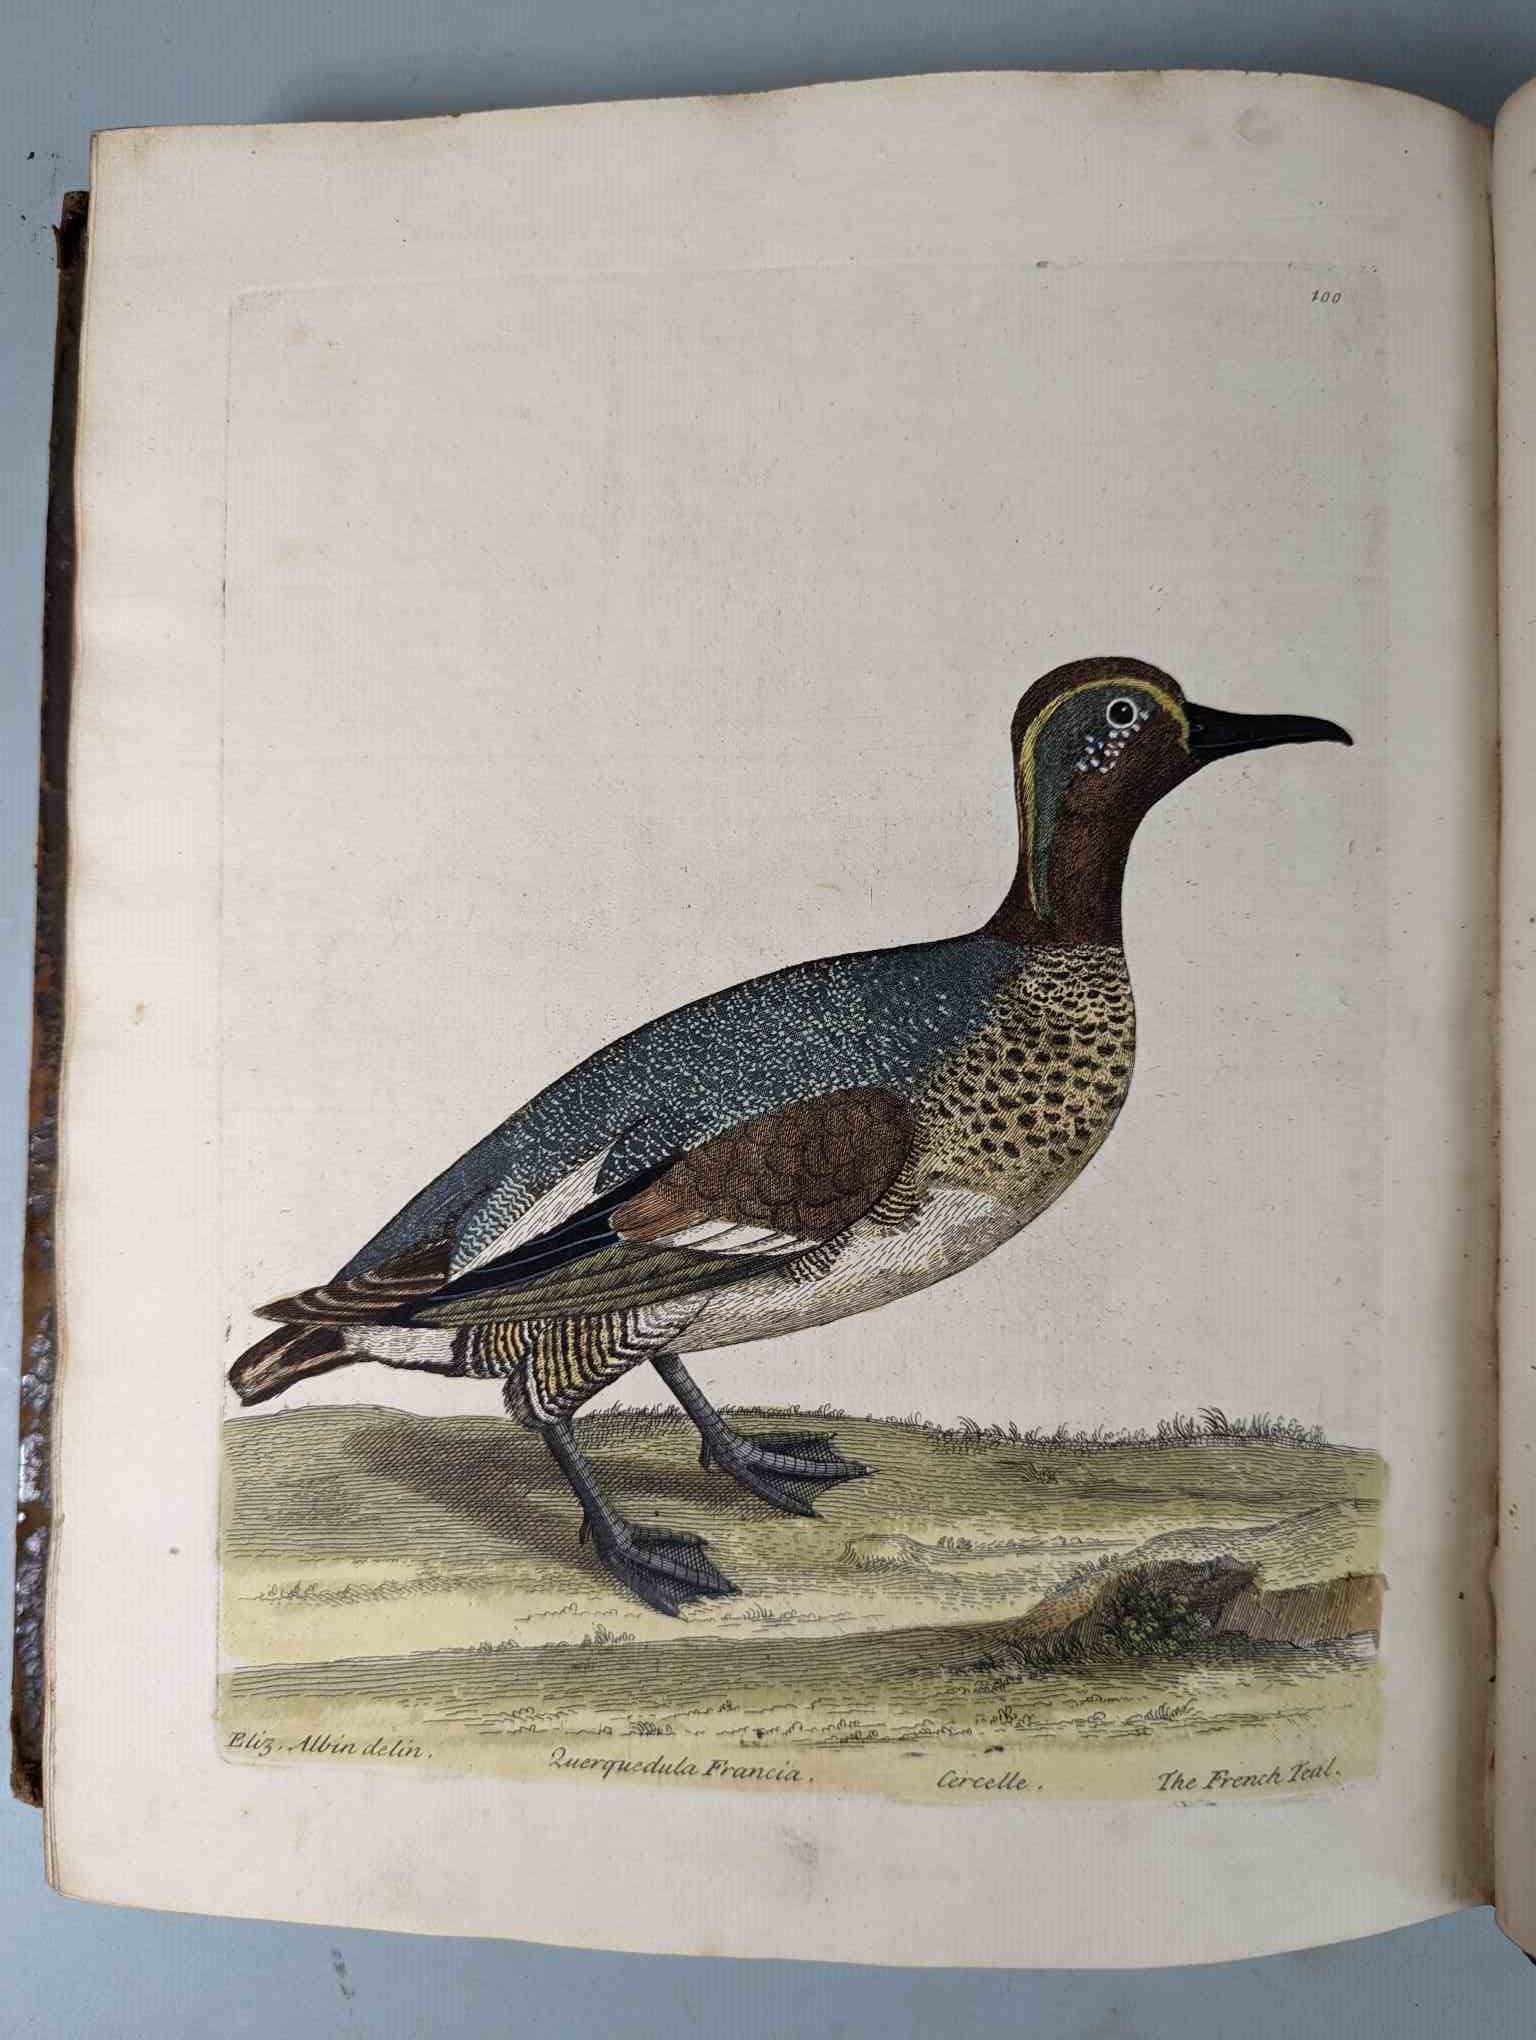 ALBIN, Eleazar. A Natural History of Birds, to which are added, Notes and Observations by W. - Image 103 of 208